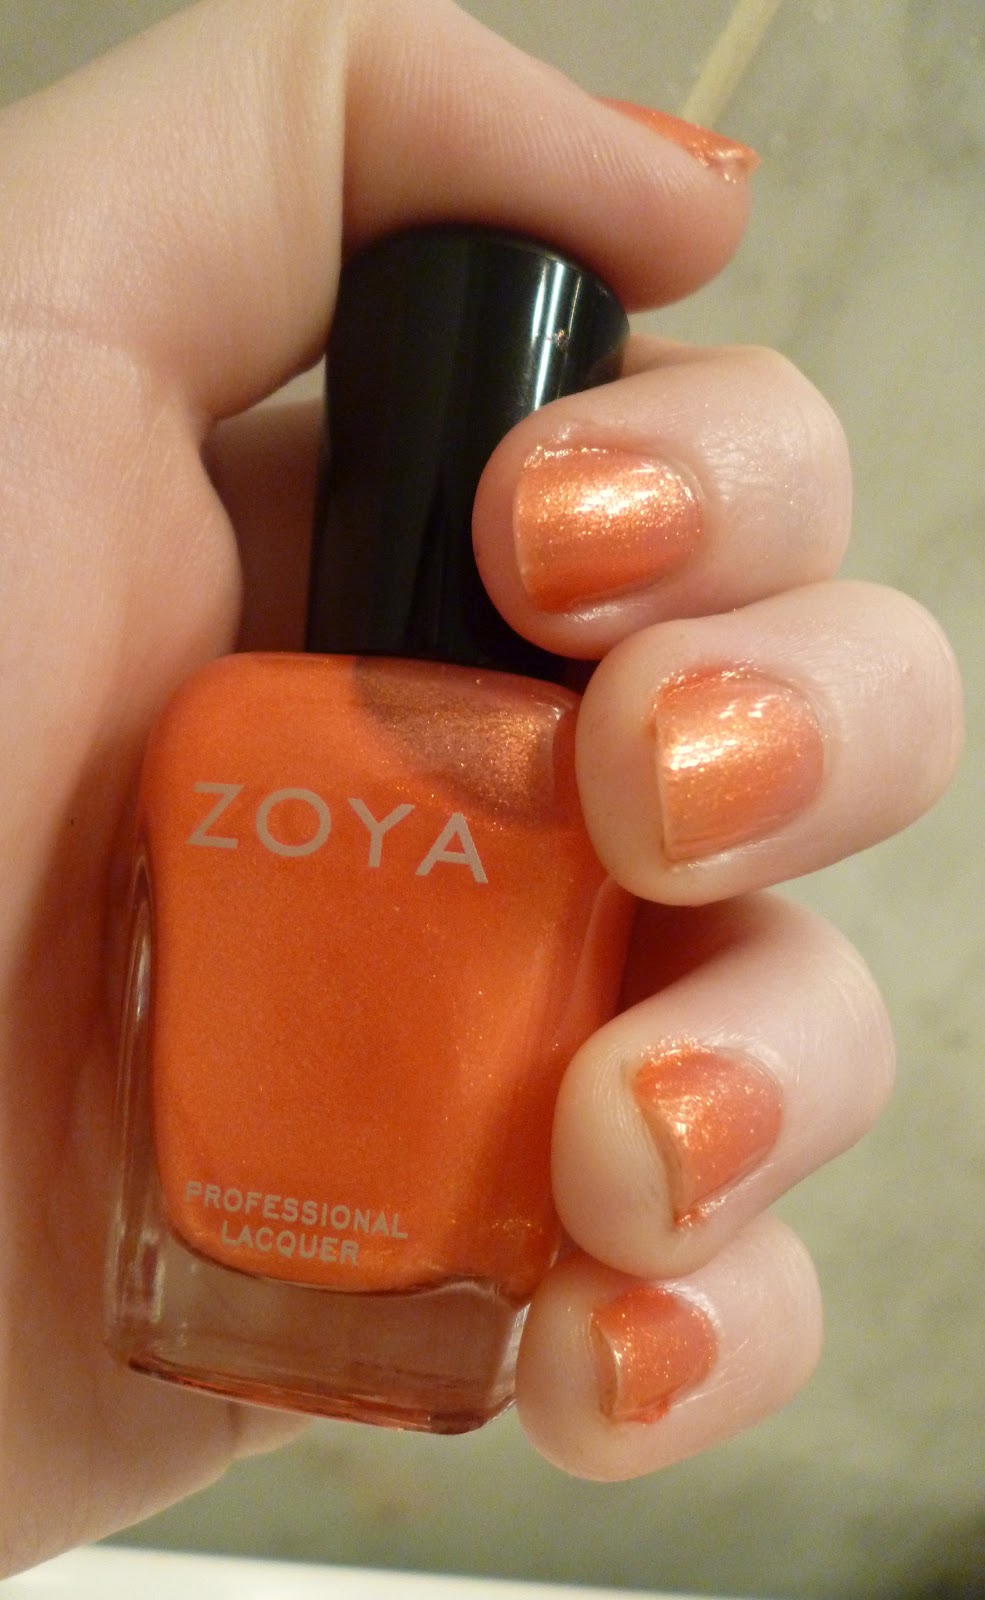 Birchbox's Exclusive Zoya Nail Polish Collection Swatches